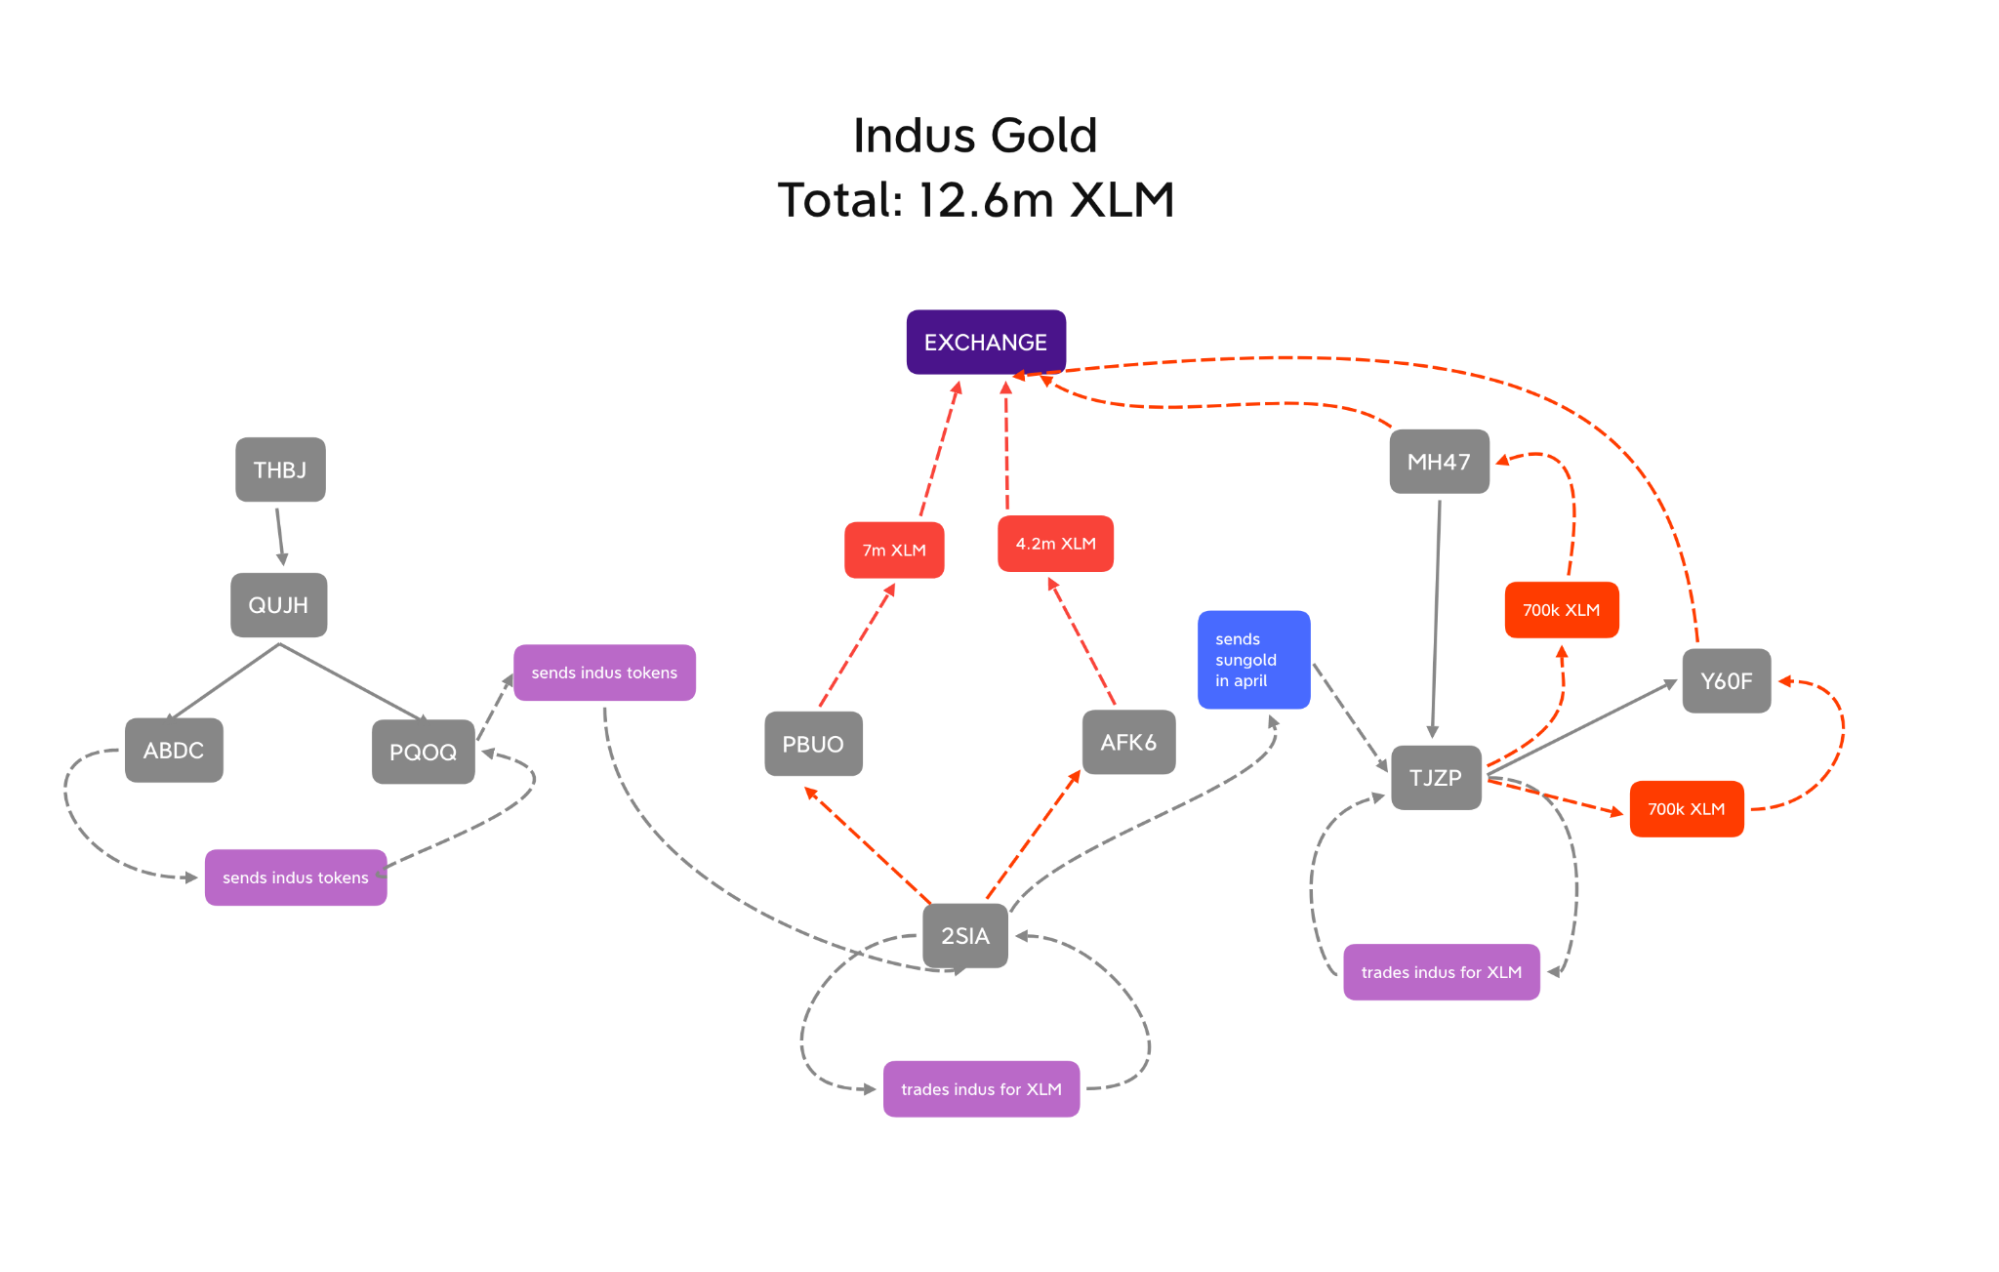 A map titled "indus Gold" showing the connections between the wallet that minted the tokens, and the wallets that made all of the profit from the tokens. Total profit was 12.6 million XLM.